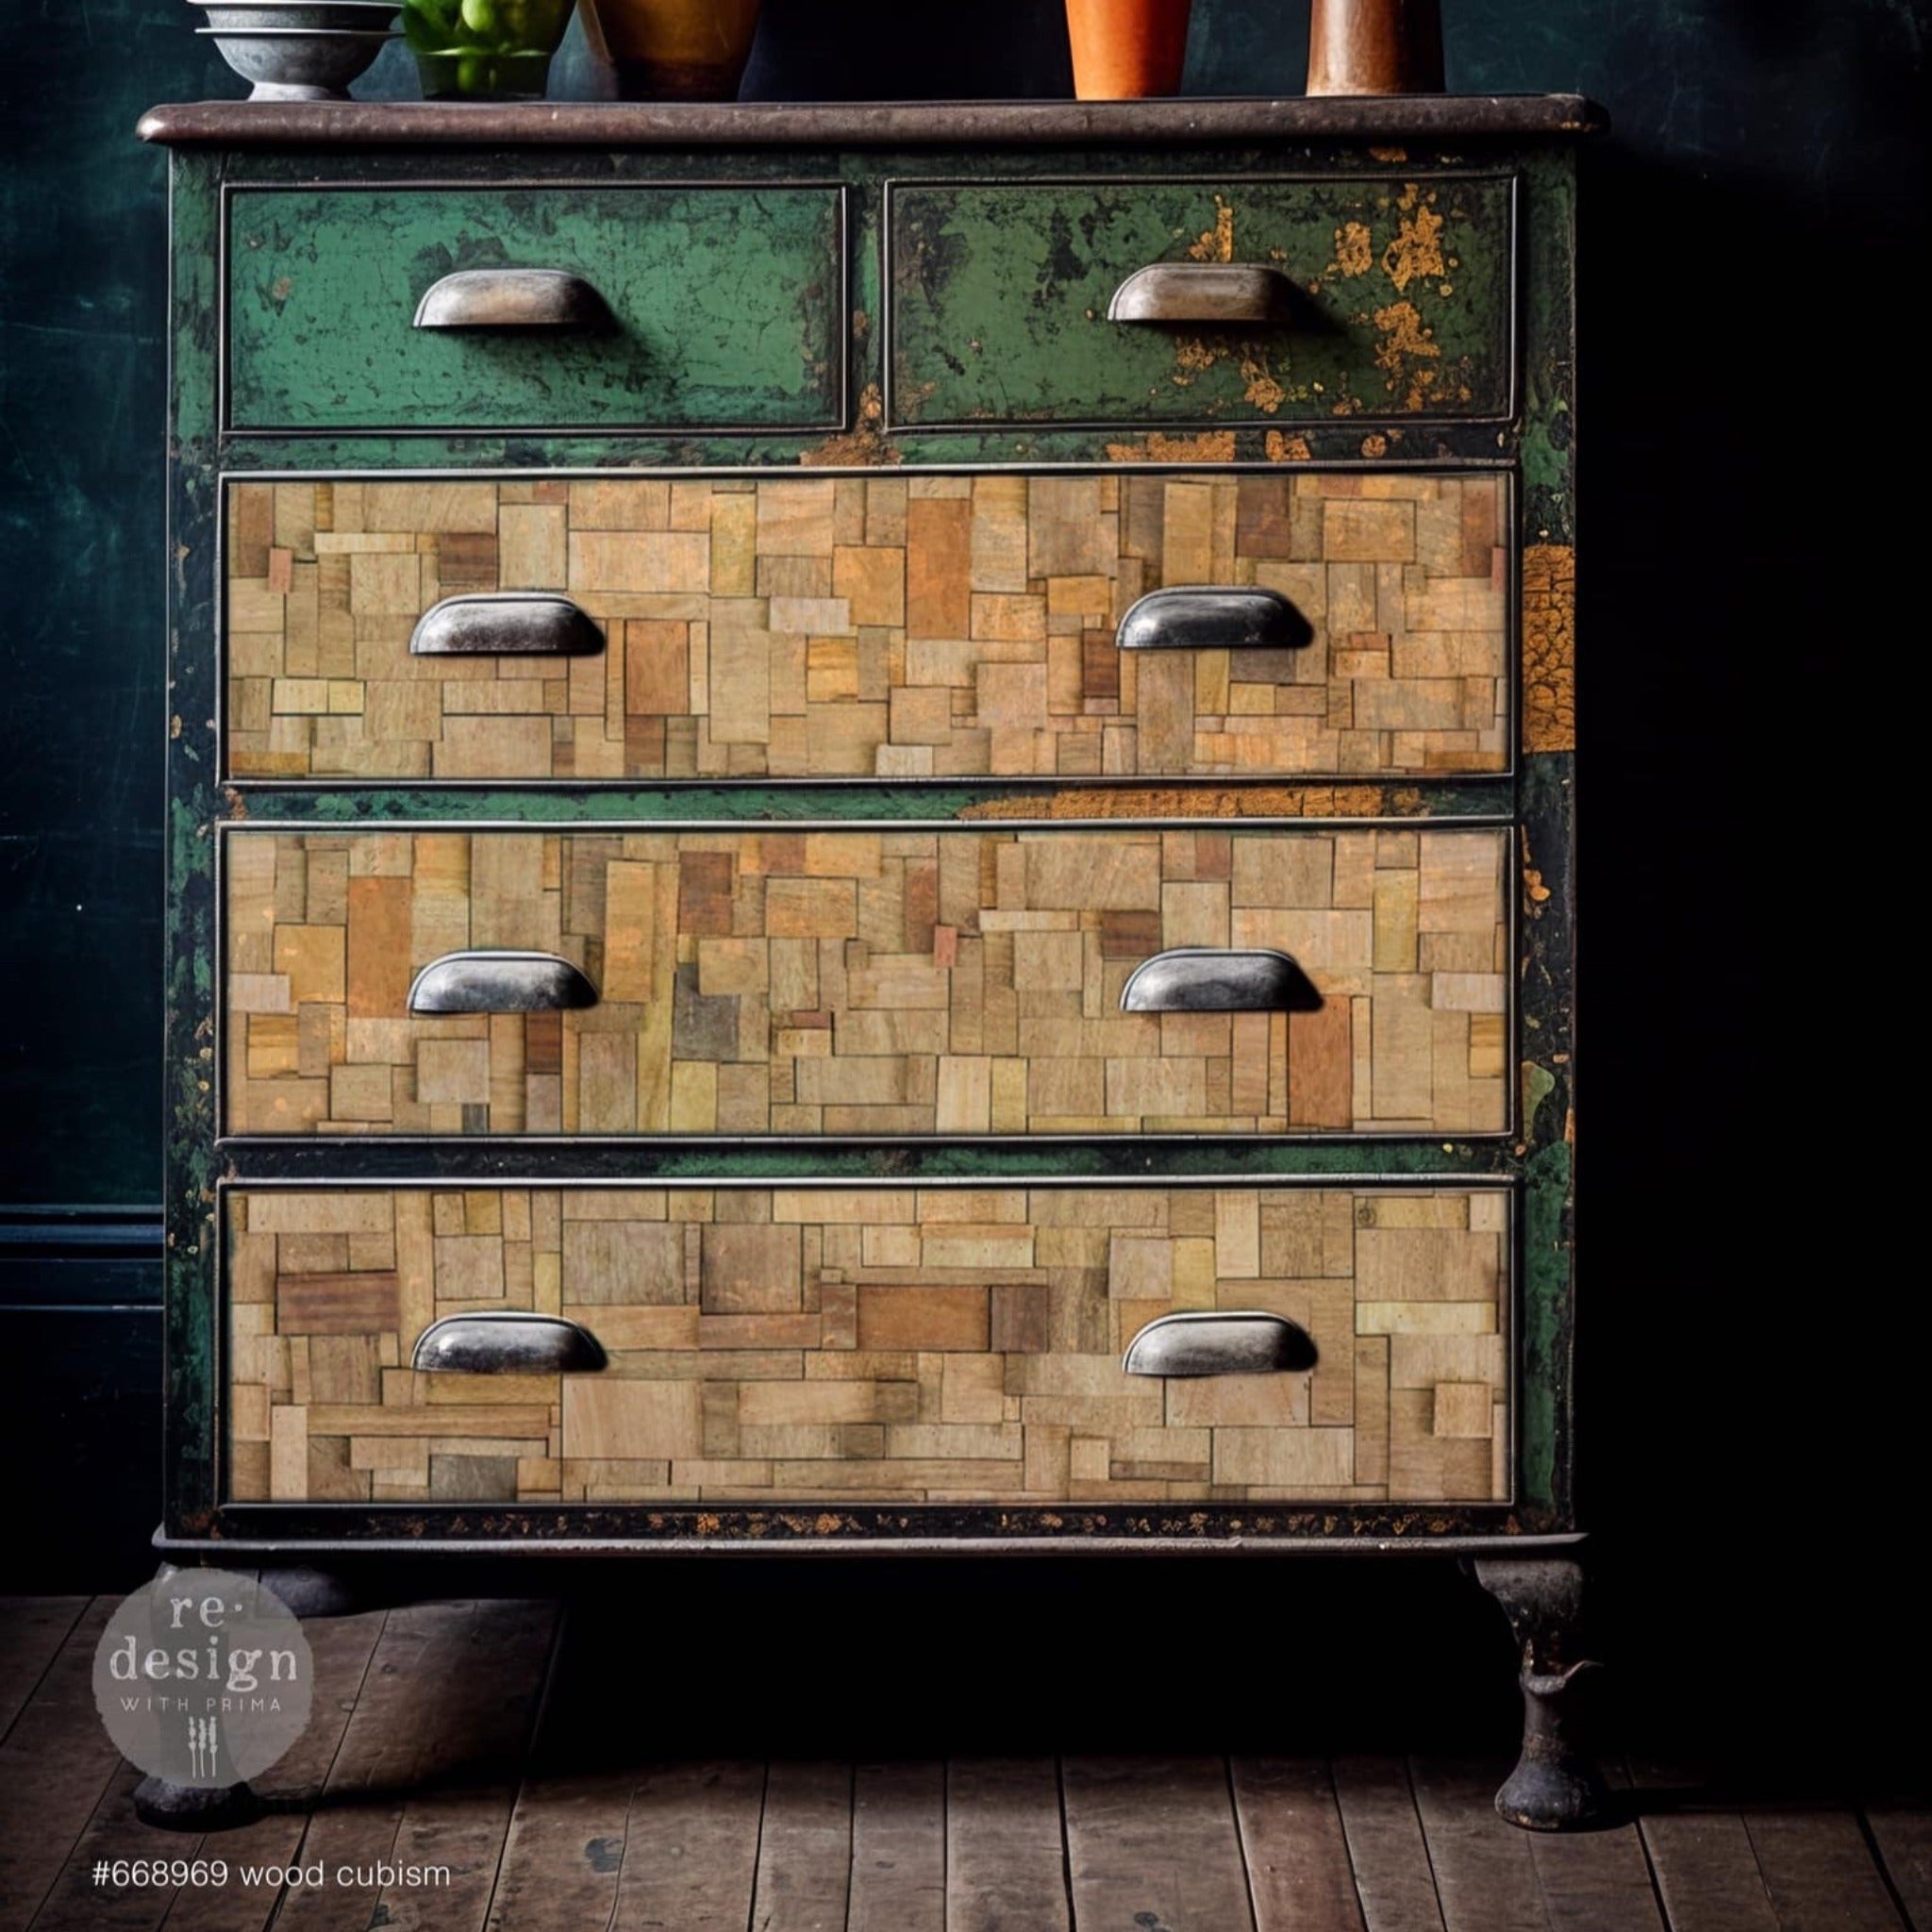 A vintage 5-drawer dresser is painted crackle navy blue with green and gold yellow and features ReDesign with Prima's Wood Cubism A1 fiber paper on its bottom 3 large drawers.